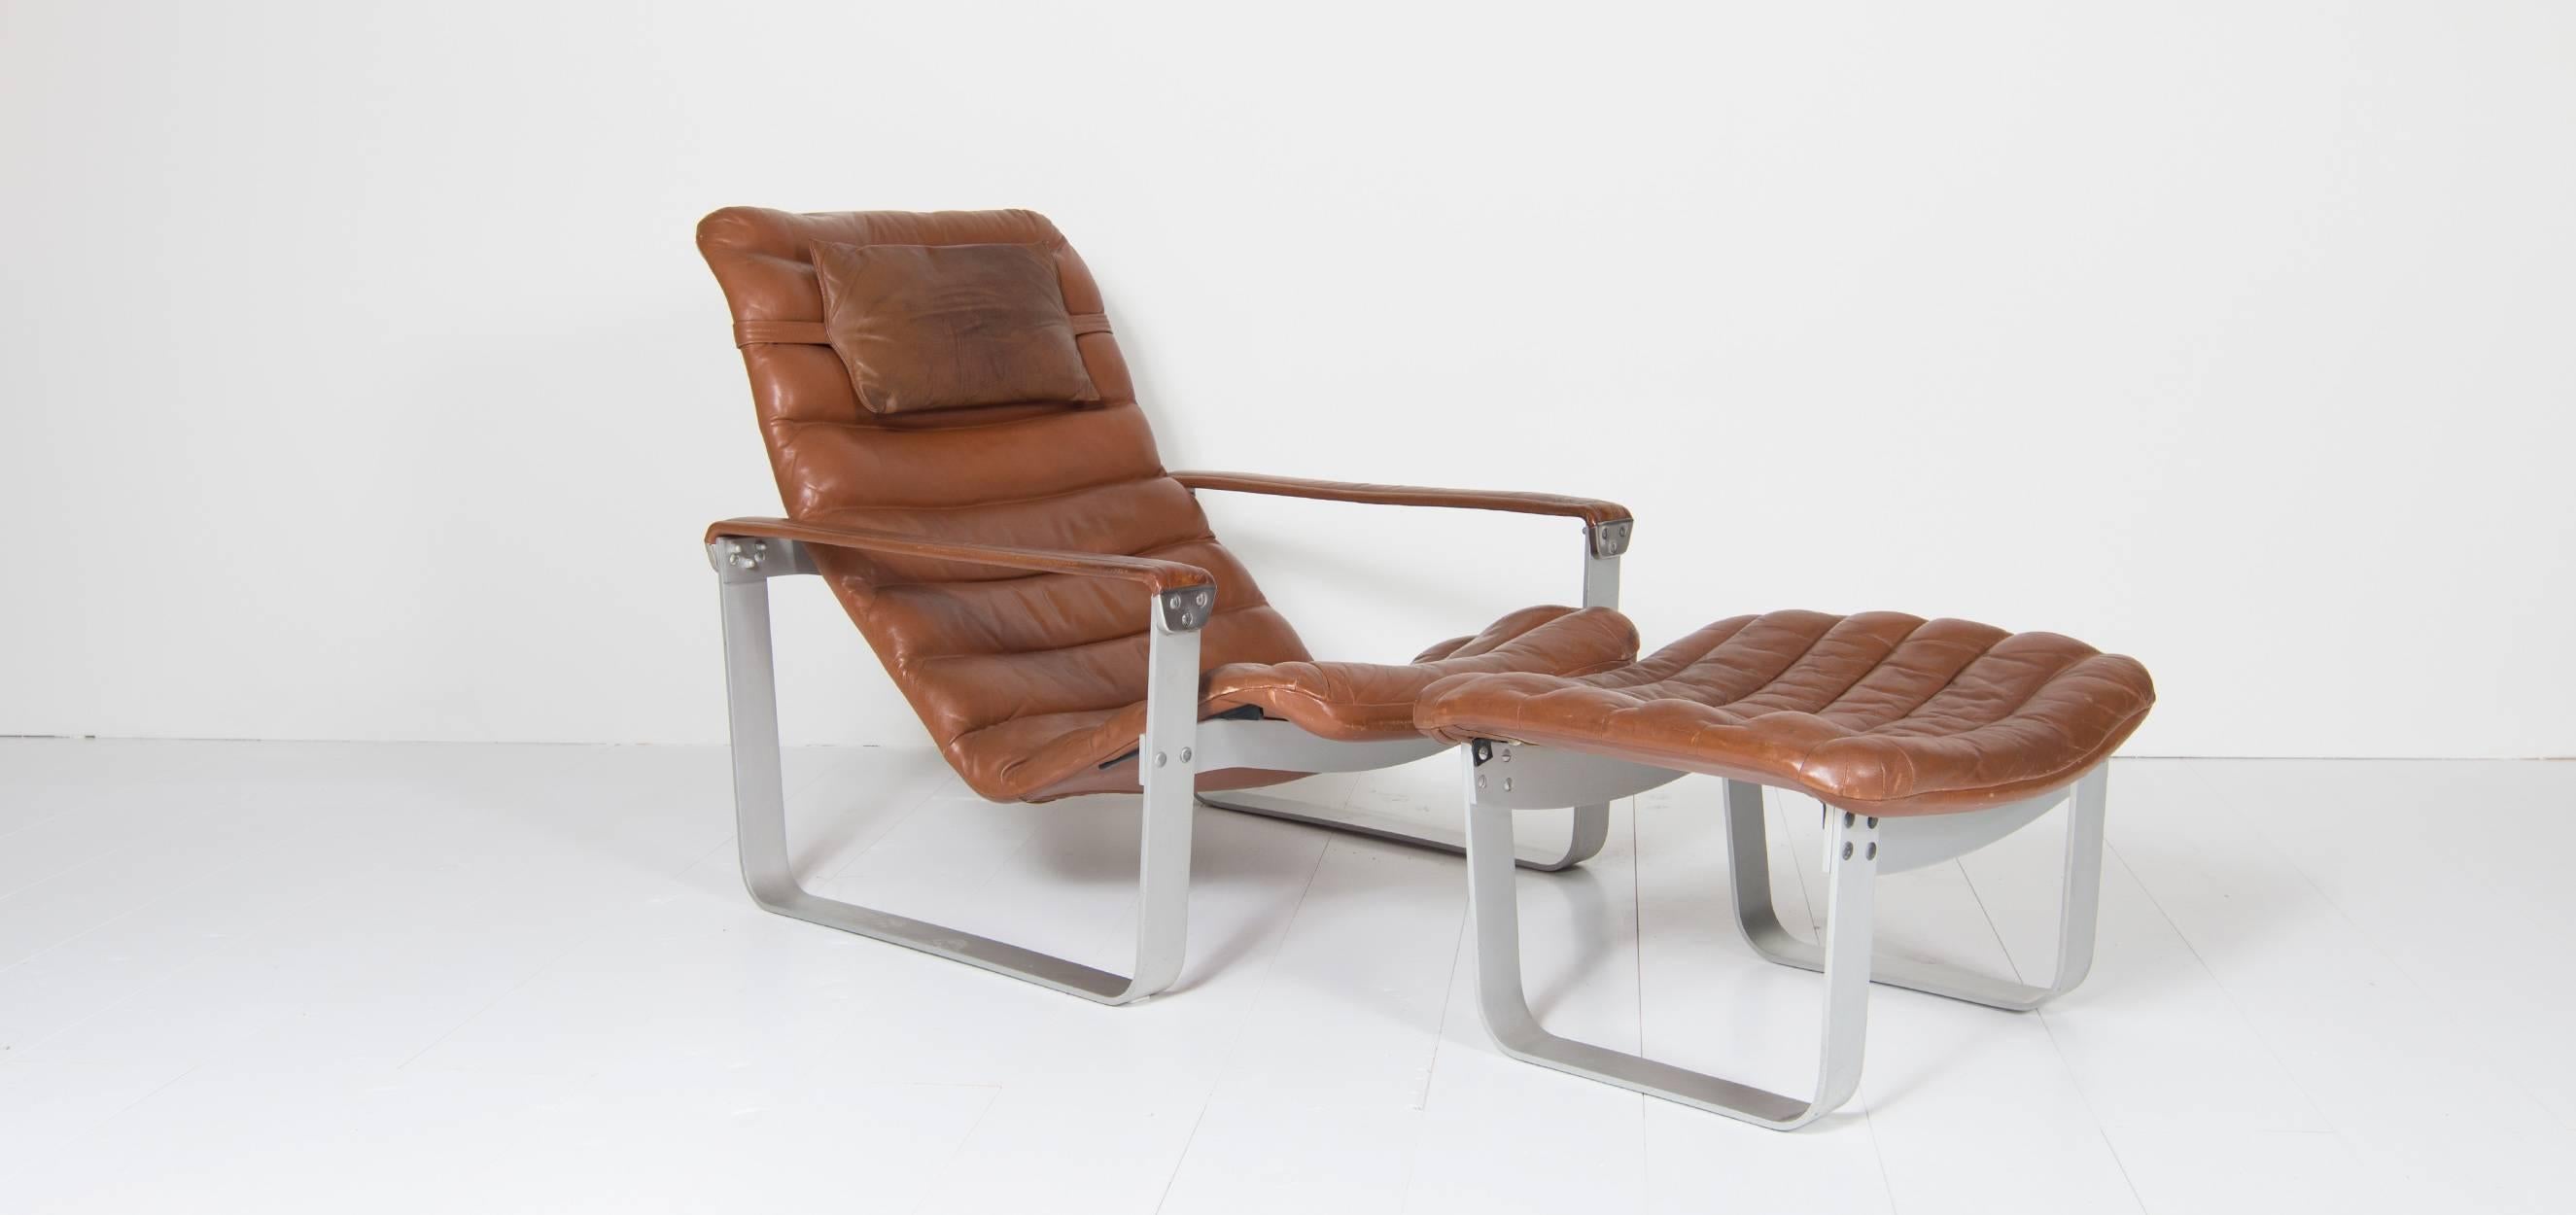 Asko chair model Pullka designed by the Finnish designer Ilmari Lappalainen in 1968. The padded shaped seat elements in leather resting on an bruised aluminium frame with leather armrests adjustable to three positions. The comfortable chairs were